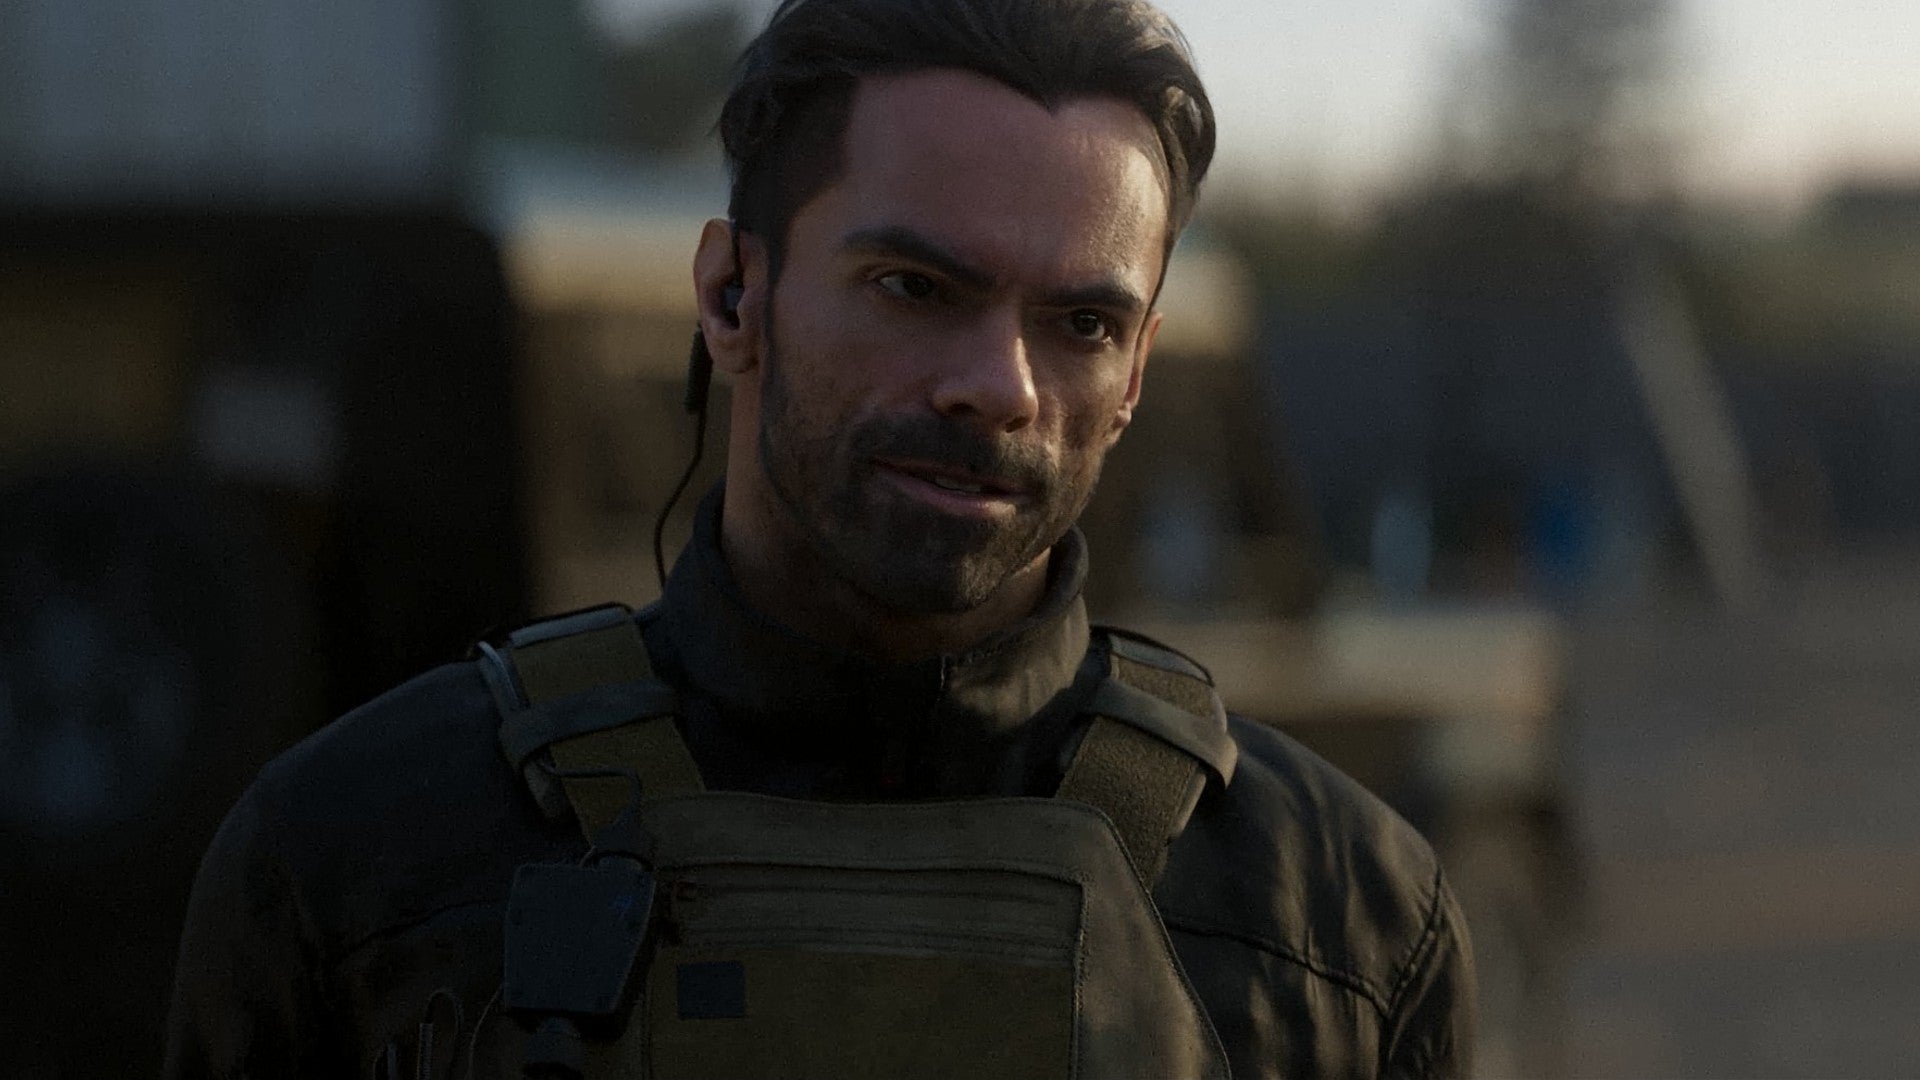 Modern Warfare 2 image showing Alejandro, with a blurred humvee in the background.